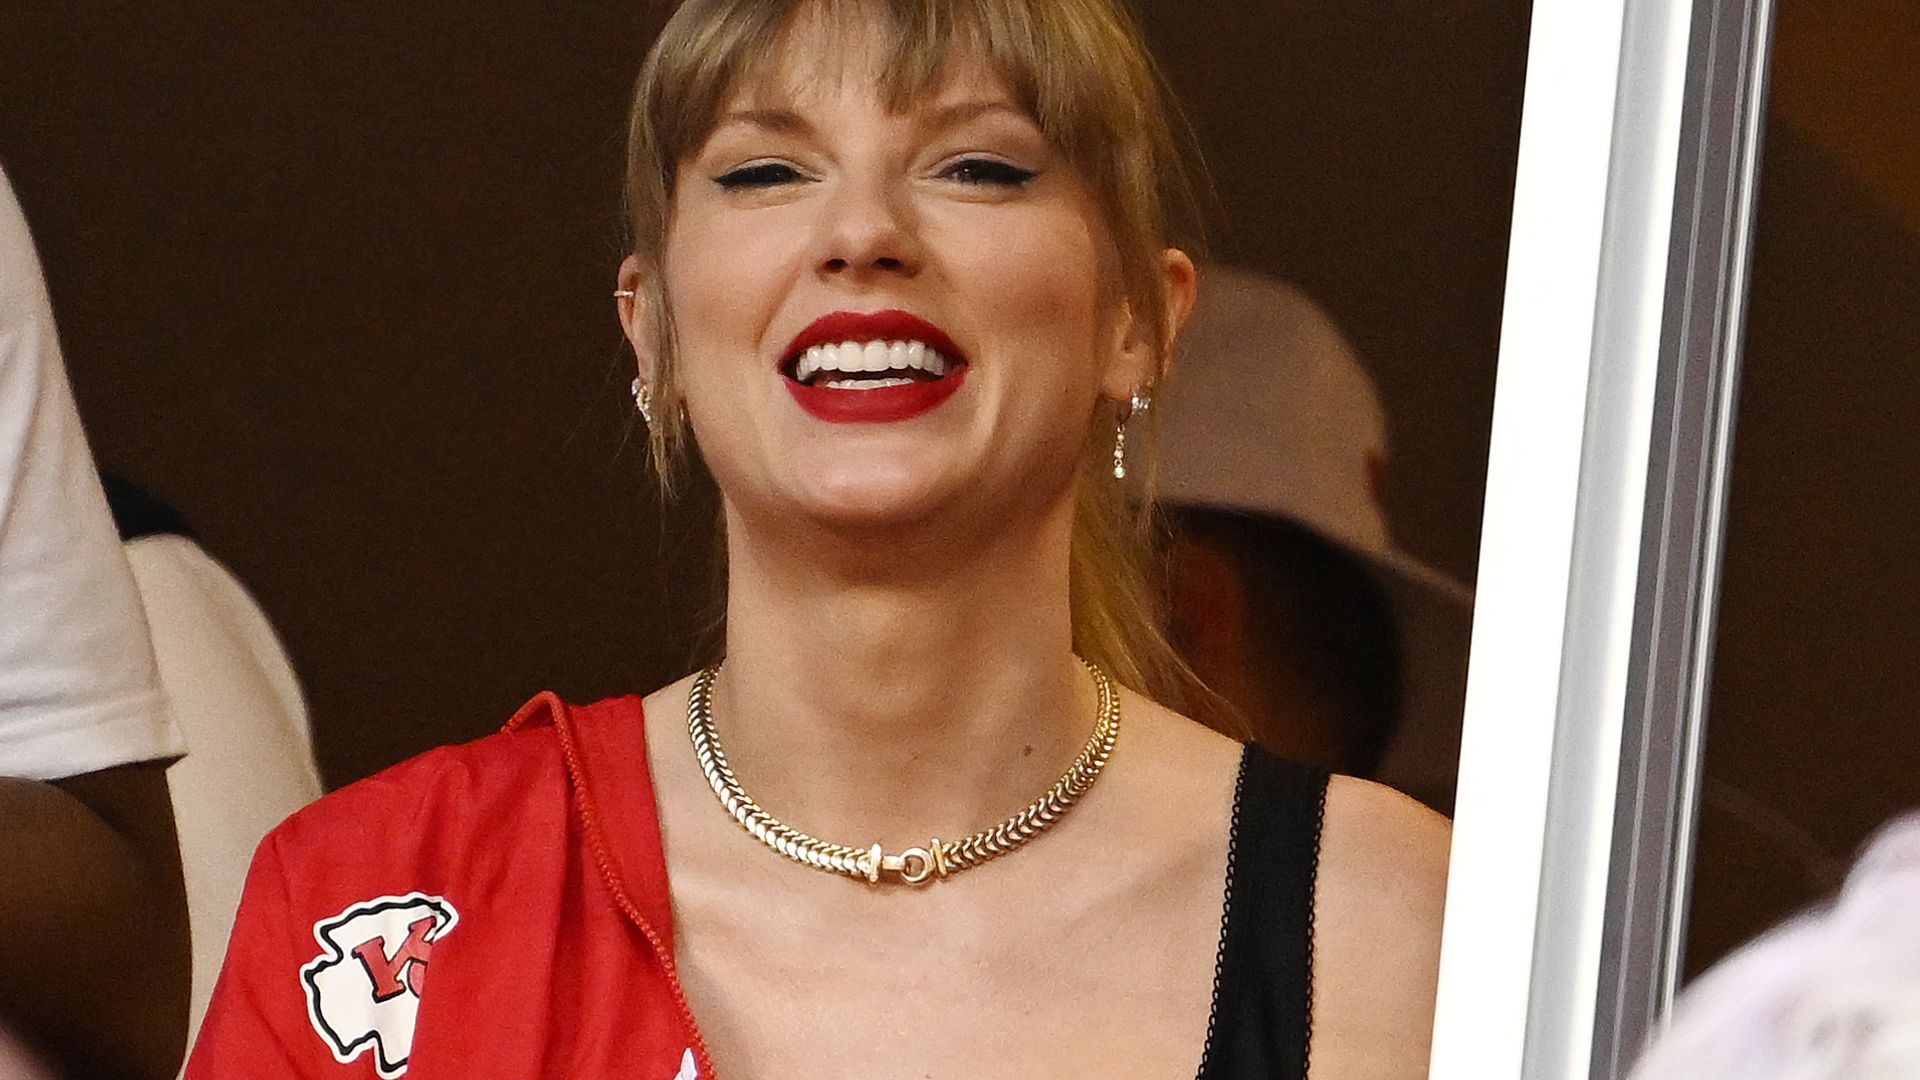 Taylor recently fixed her chipped tooth